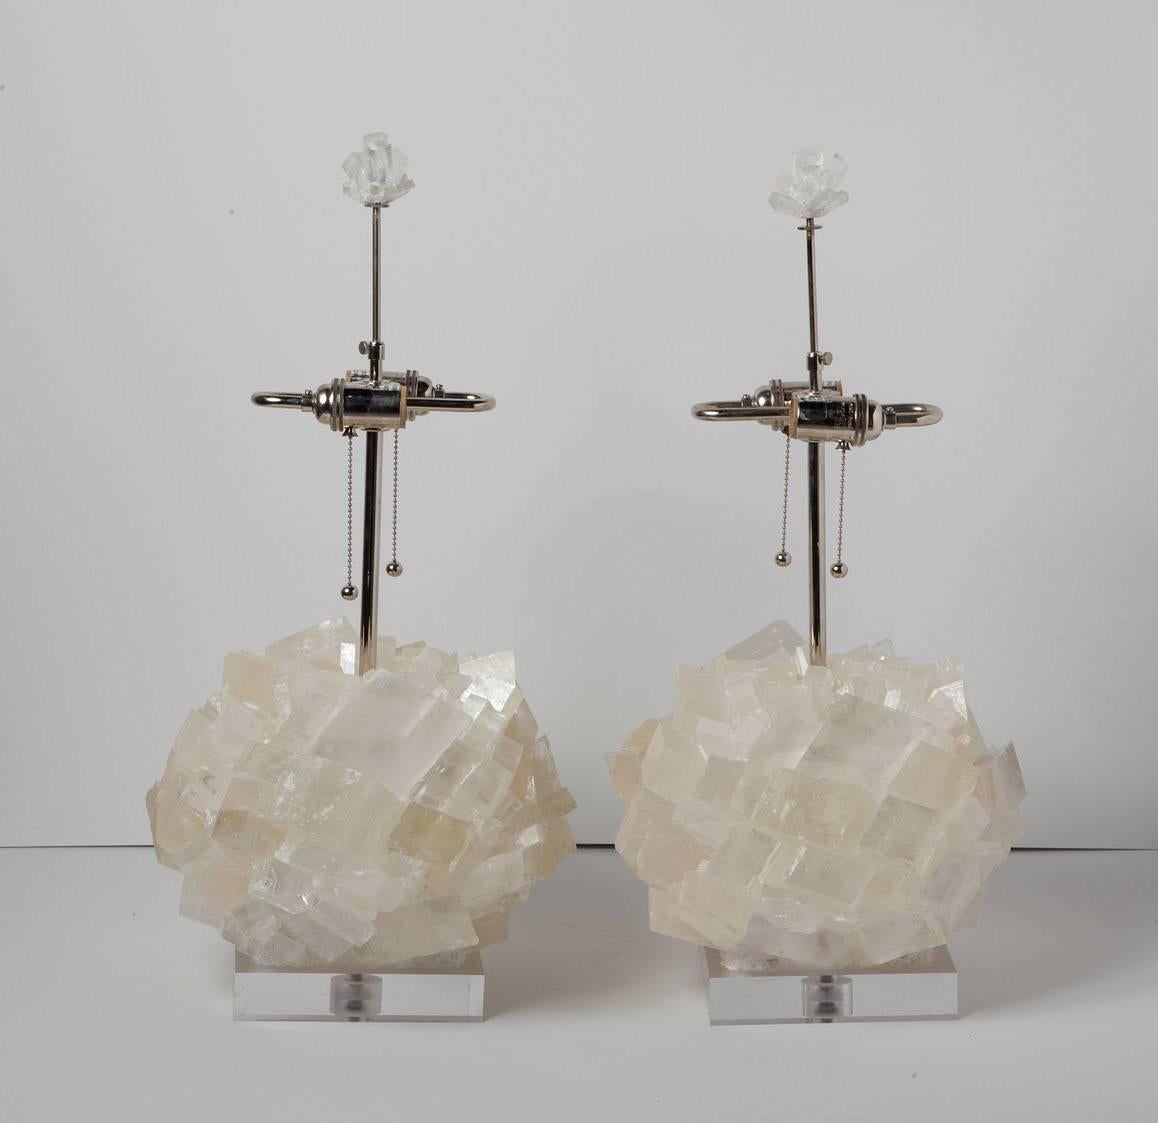 Glamorous natural crystal table lamps by Kathryn McCoy in prismatic optical calcite on acrylic bases. Fabric cord and nickel hardware, with matching crystal finials. Height measurement below is to top of finial. (Shades not included).